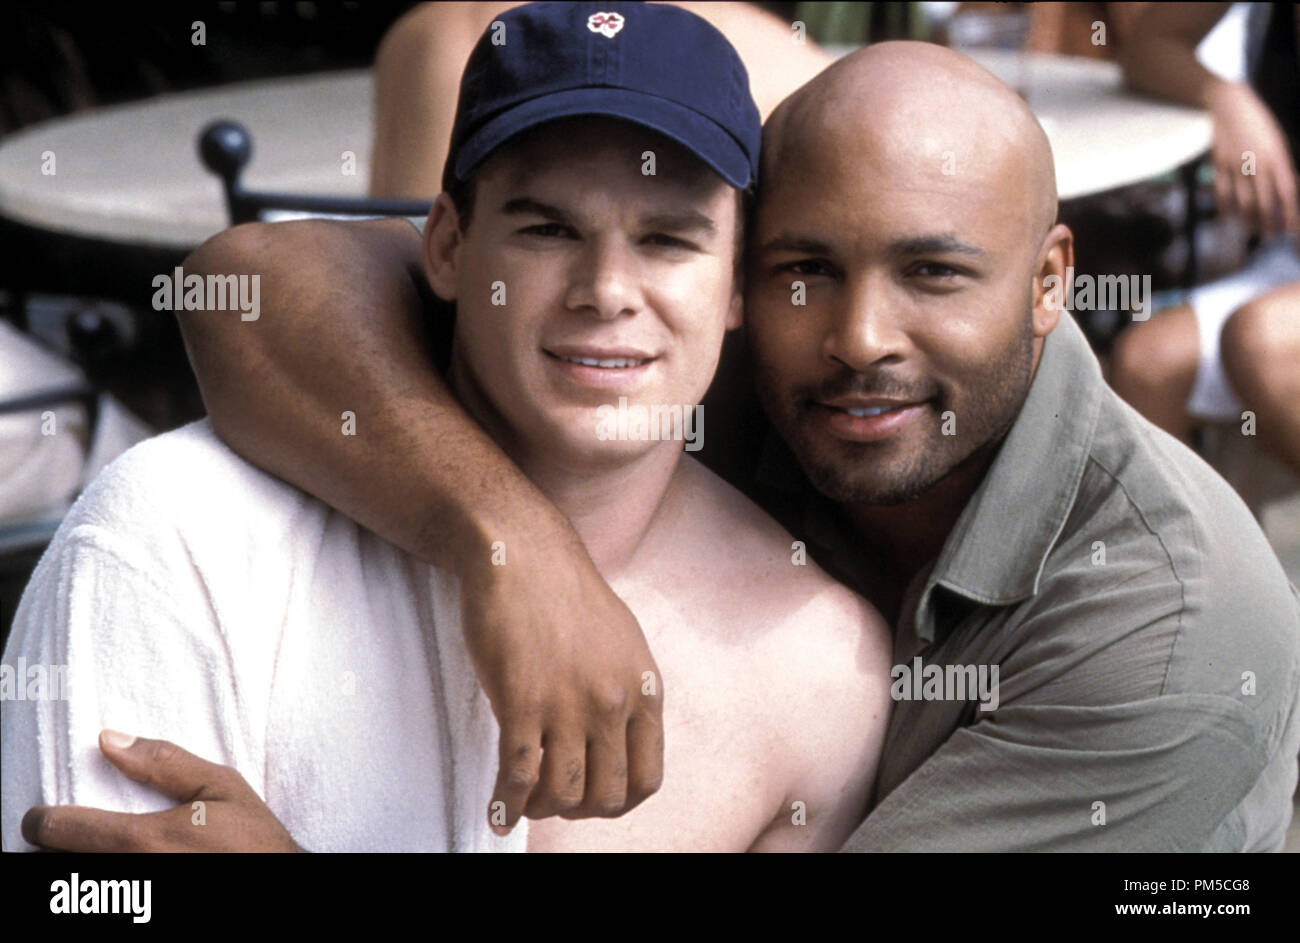 Film Still / Publicity Still from 'Six Feet Under' Michael C. Hall, Mathew St. Patrick © 2003 HBO Photo Credit: John Johnson  File Reference # 30753054THA  For Editorial Use Only -  All Rights Reserved Stock Photo